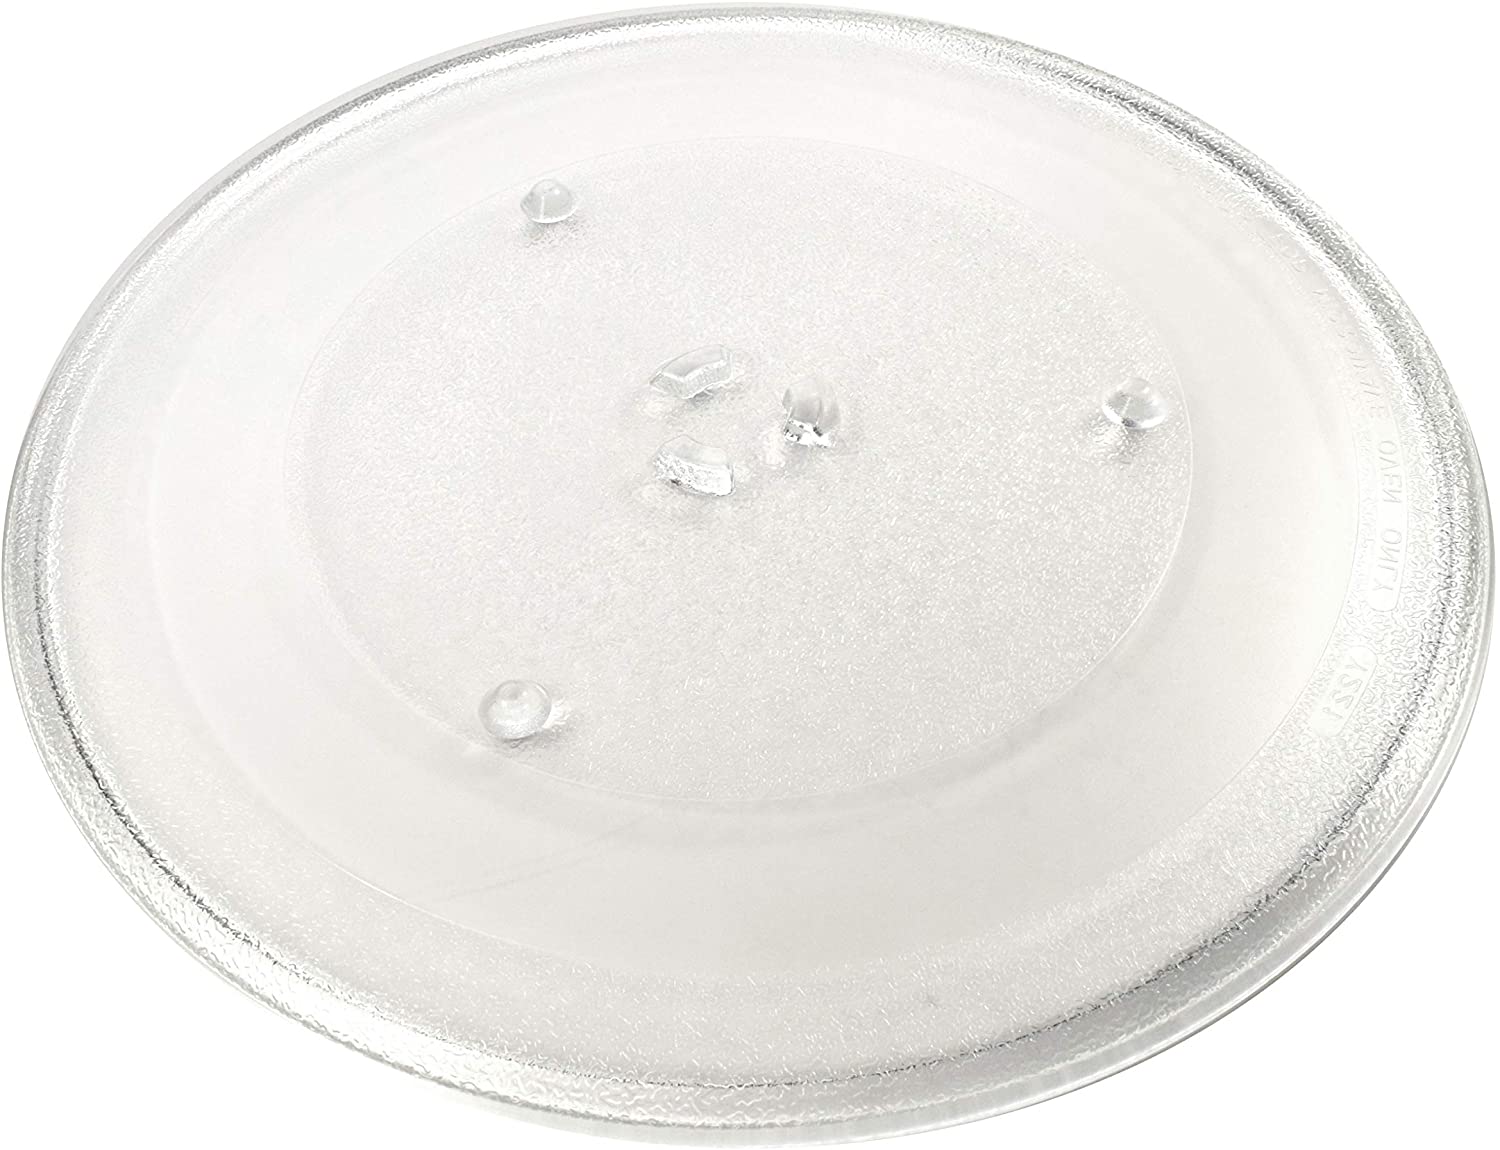 HQRP 13 1/2" Glass Turntable Tray fits GE WB39X10032 AVM4160DF1BS CEB1590SJ1SS CEB1599EL1DS CEB515M2N1S5 JES1651SR1SS JES1656SR1SS